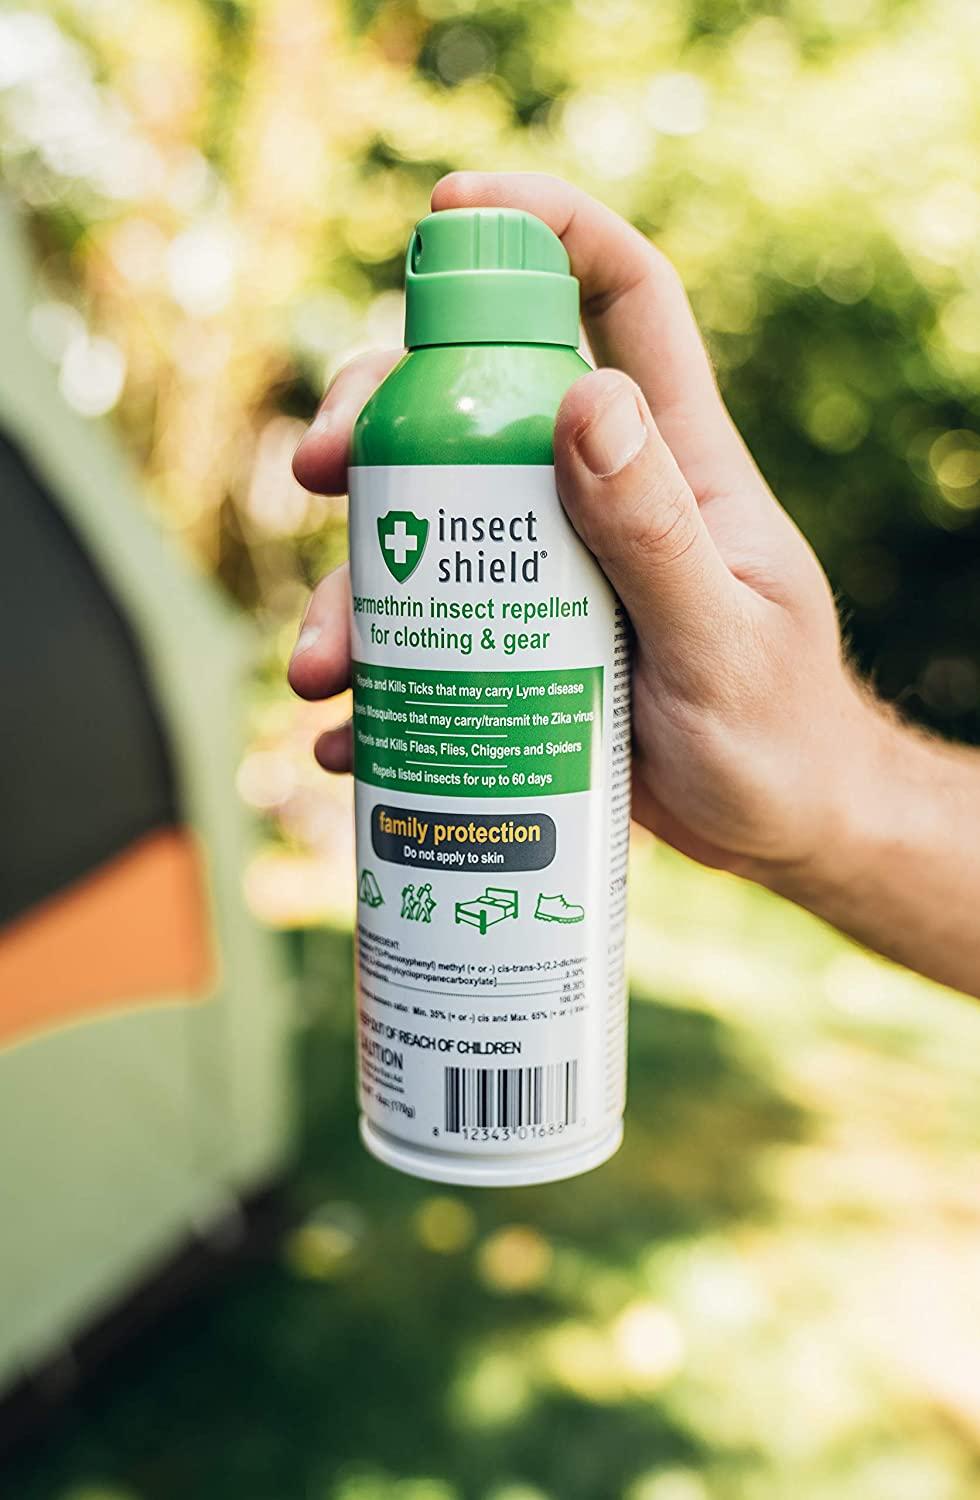 Insect Shield Premium Permethrin Spray Insect Repellent for Clothing, Gear,  Tents, Last up to 60 Days, Clear (6 Oz Aerosol)